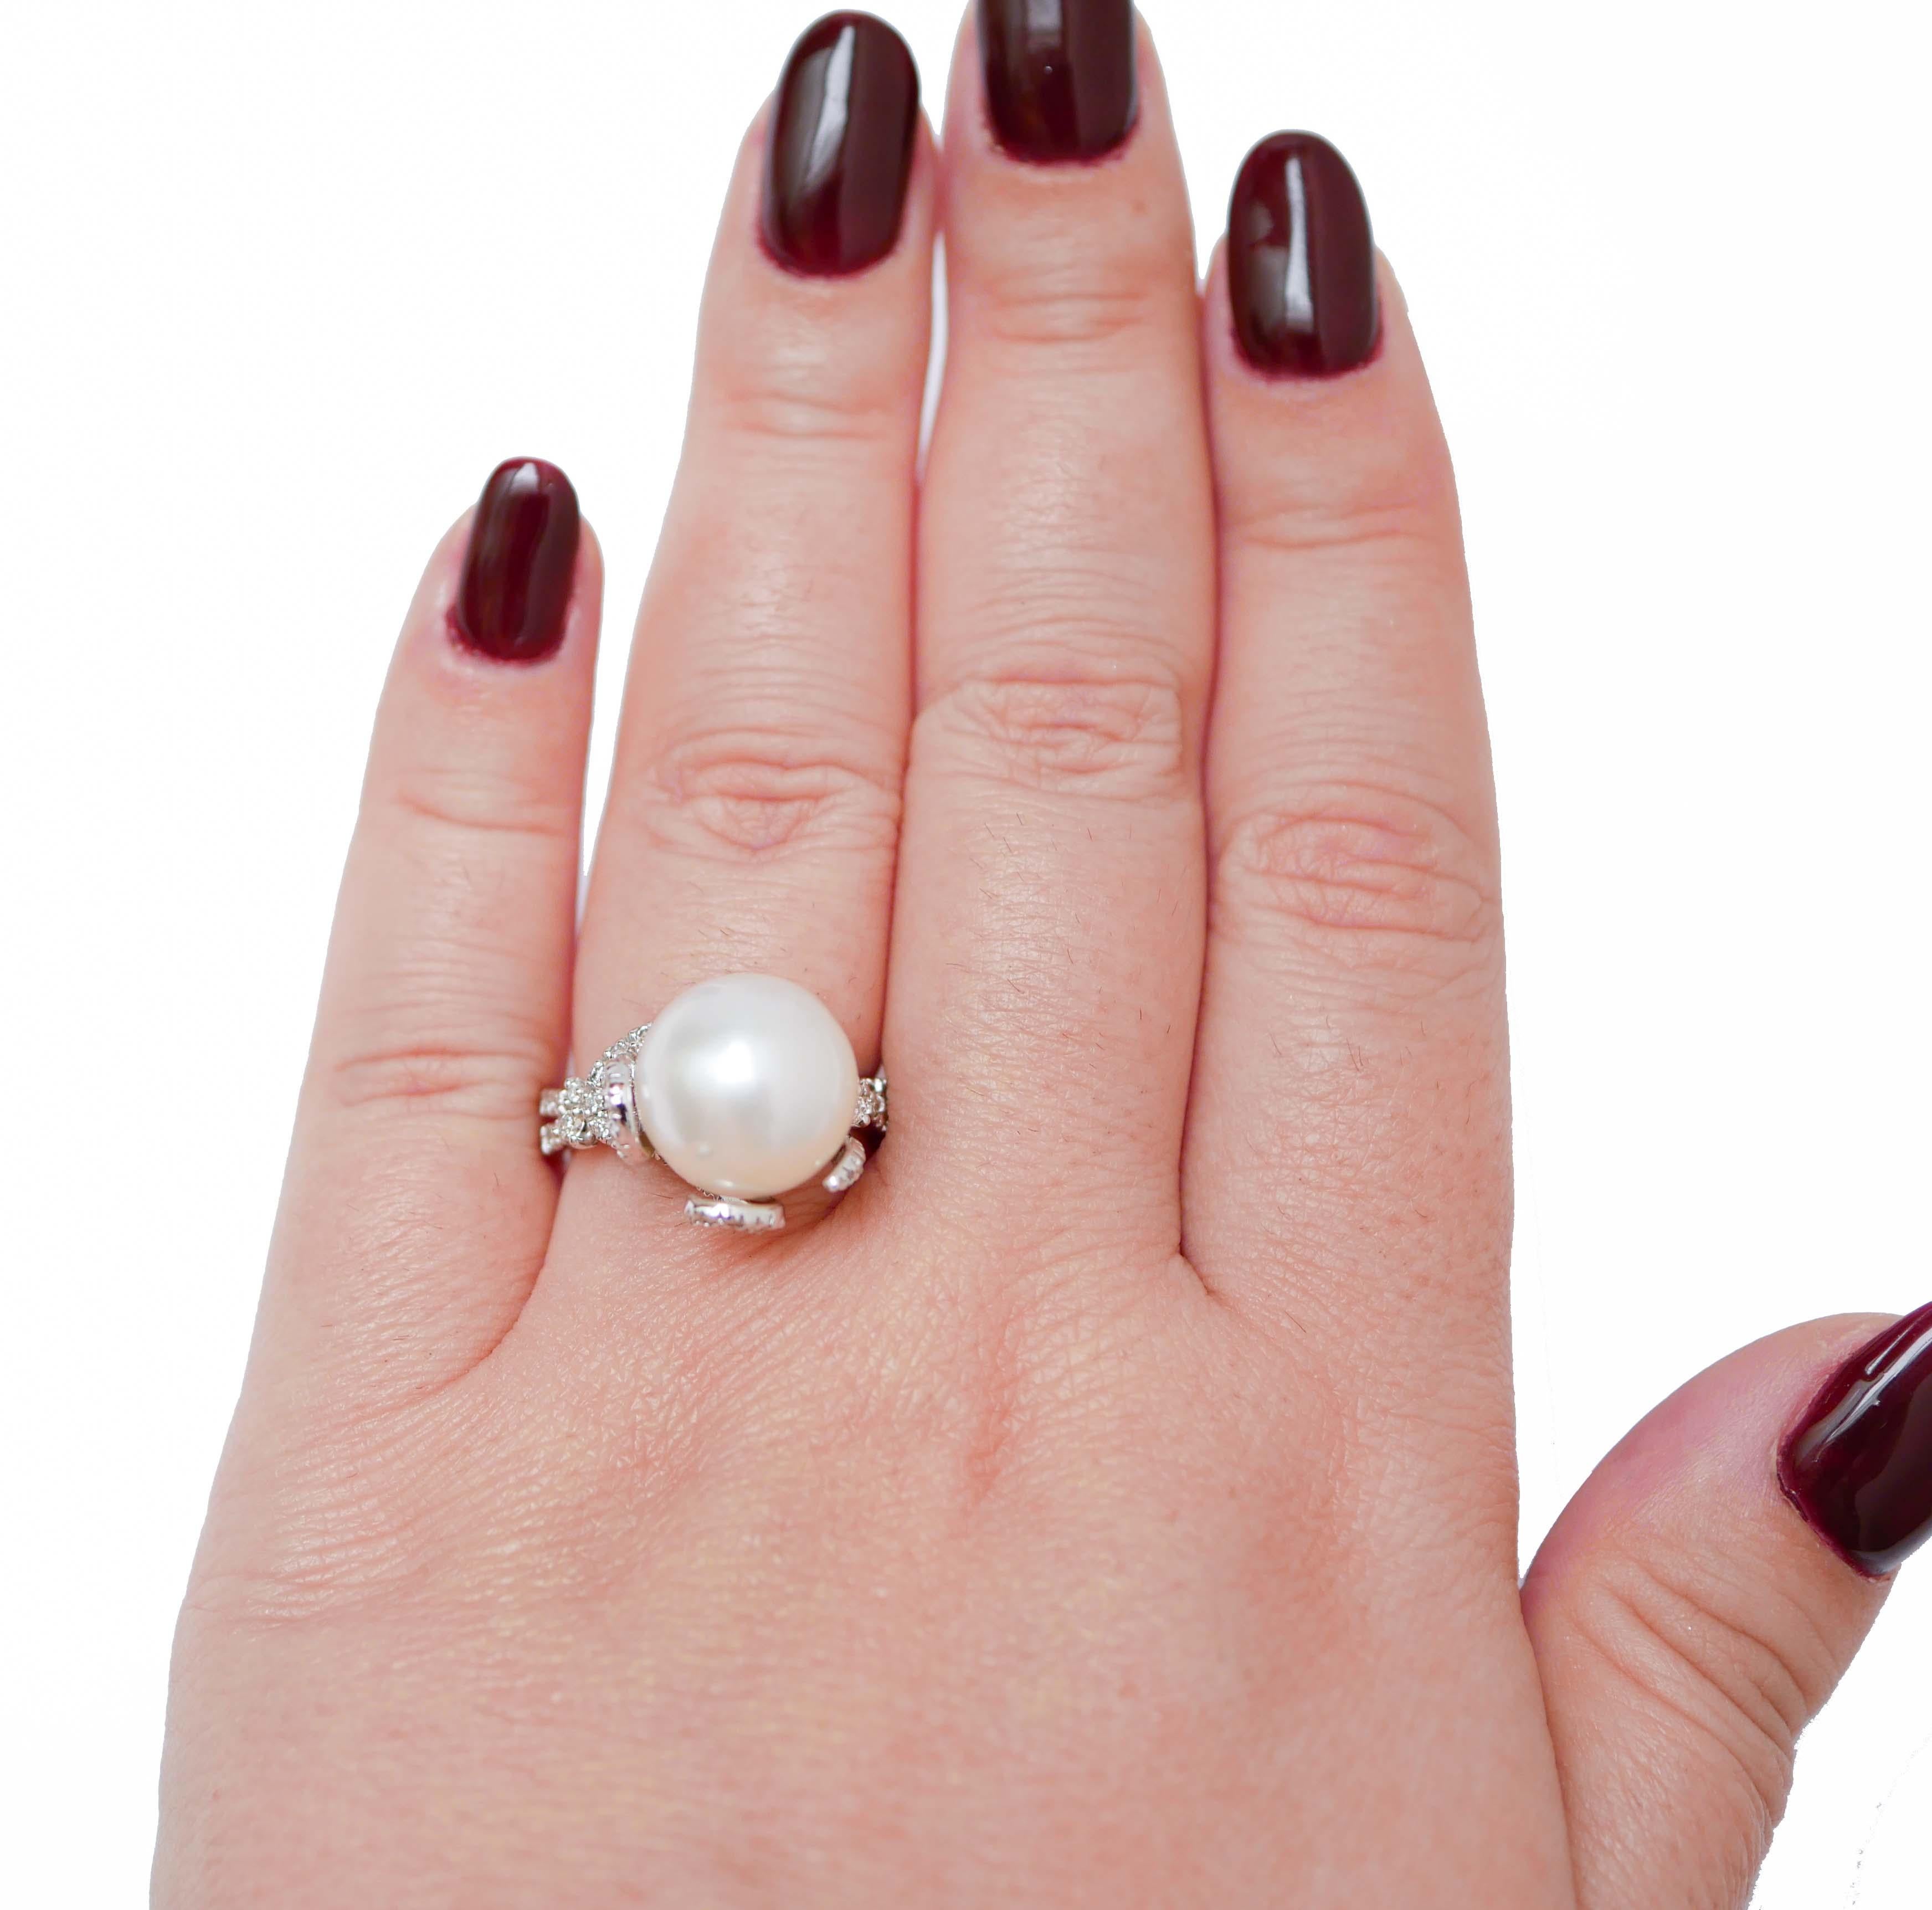 Mixed Cut Pearl, Diamonds, 18 Karat White Gold Ring. For Sale